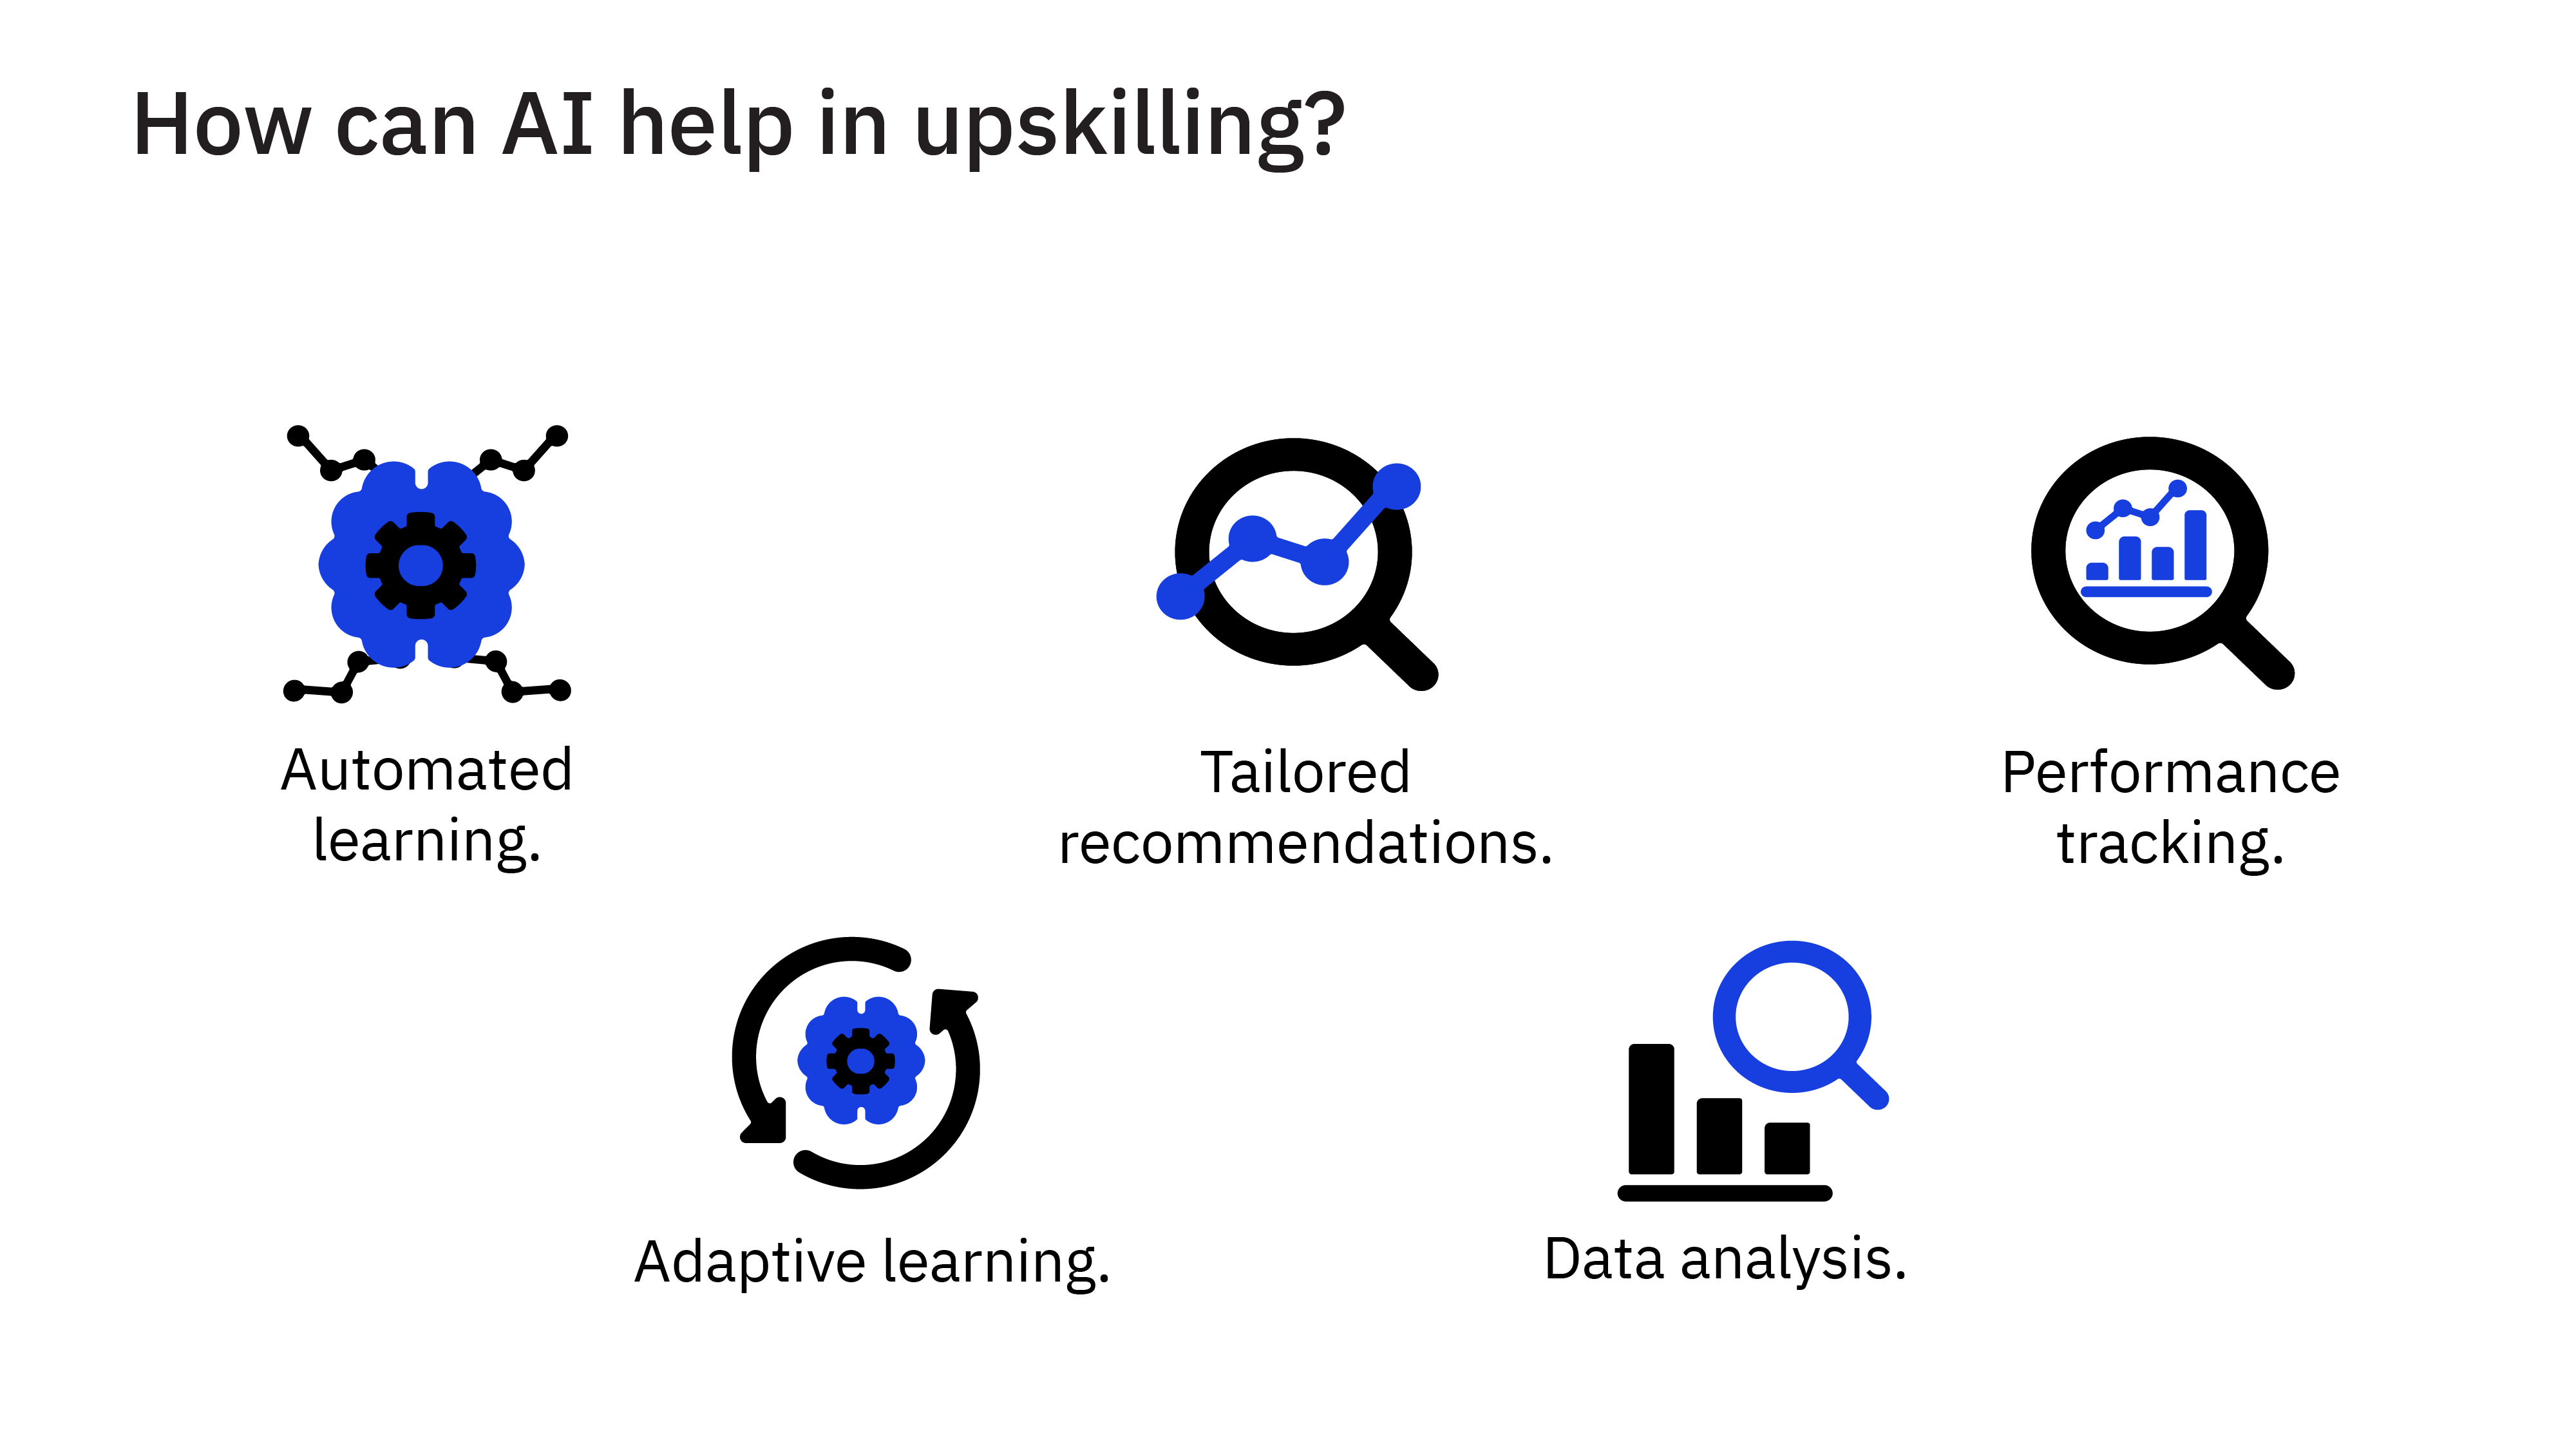 How can AI help in upskilling?